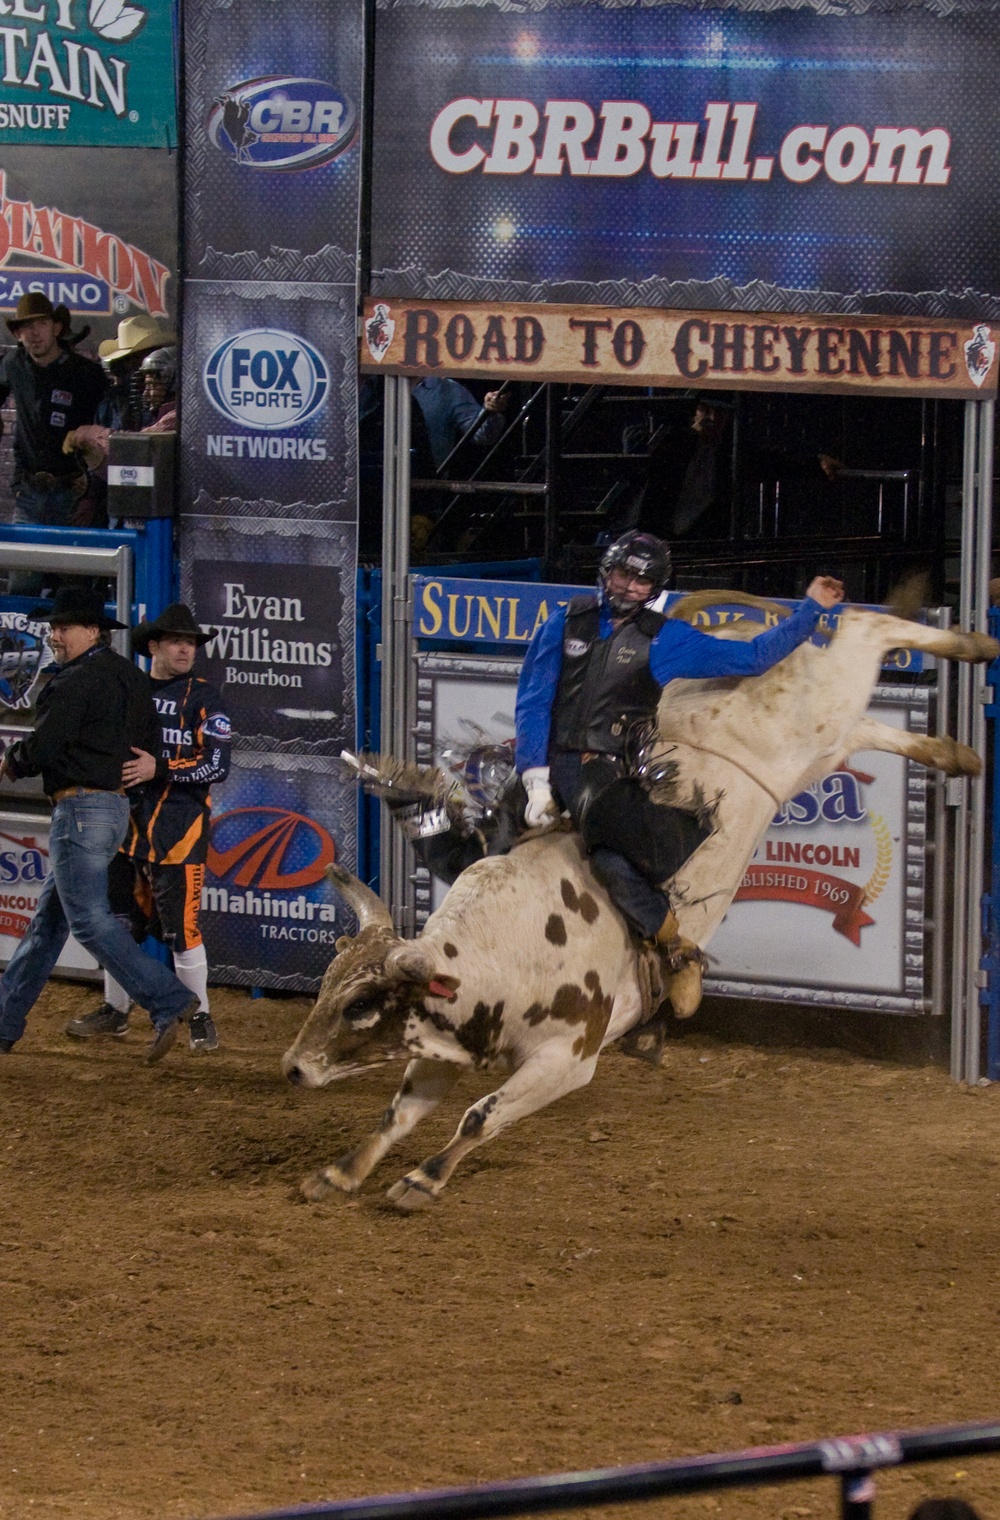 Fort Bliss soldiers, friends and family enjoy ‘Championship Bull Riding’